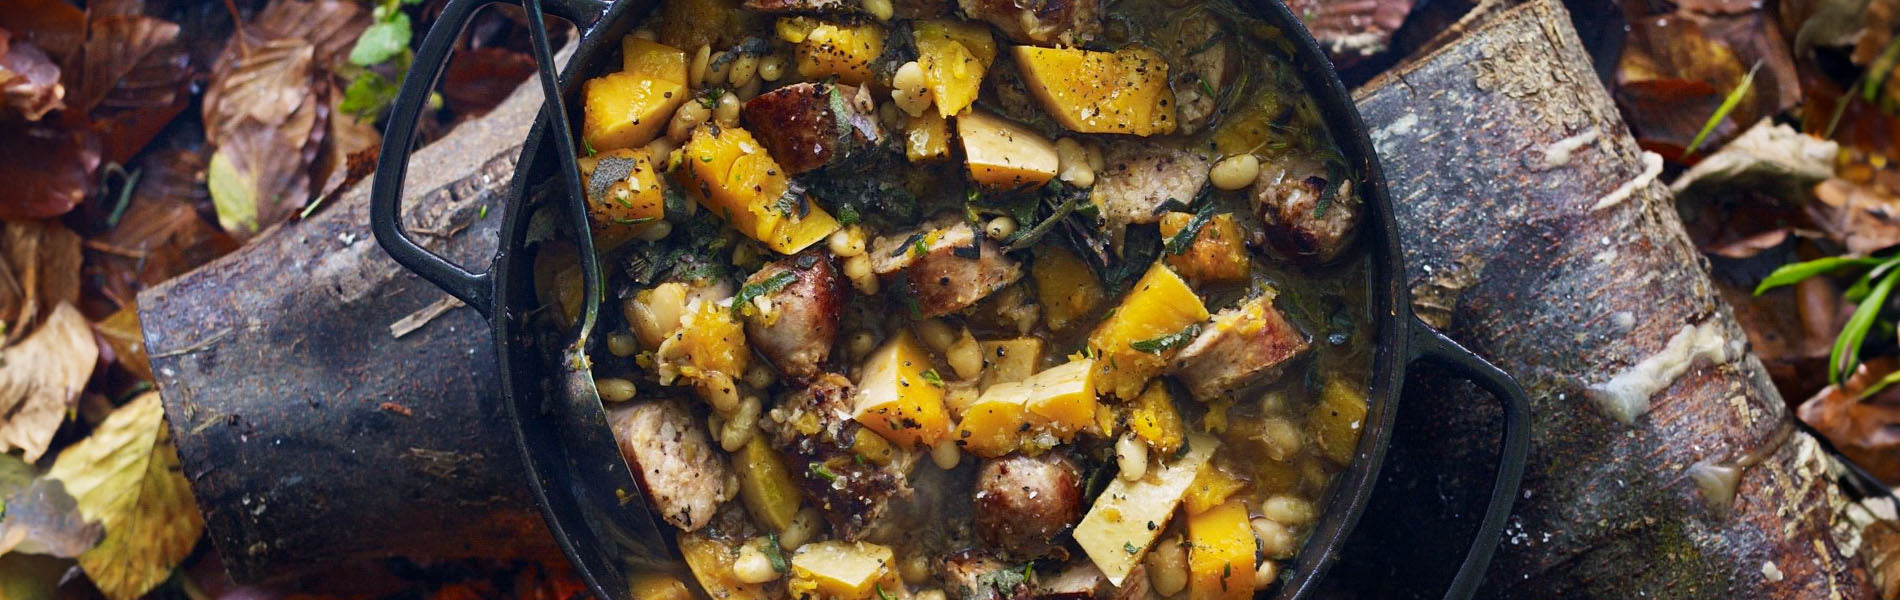 Sausages and squash with sage, rosemary and beans